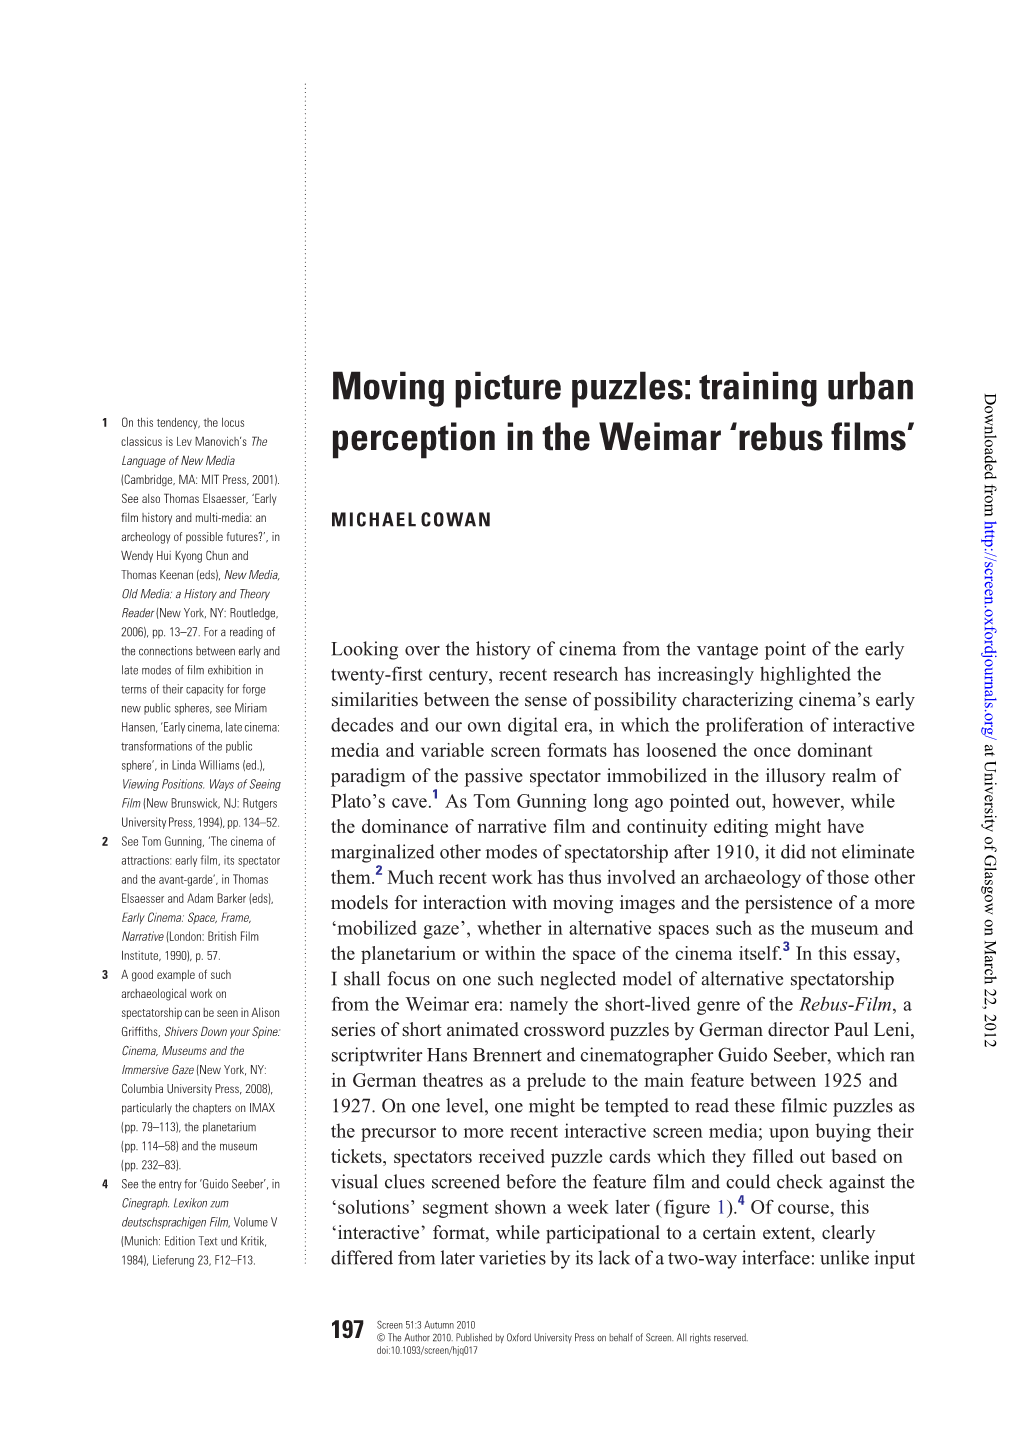 Moving Picture Puzzles: Training Urban Perception